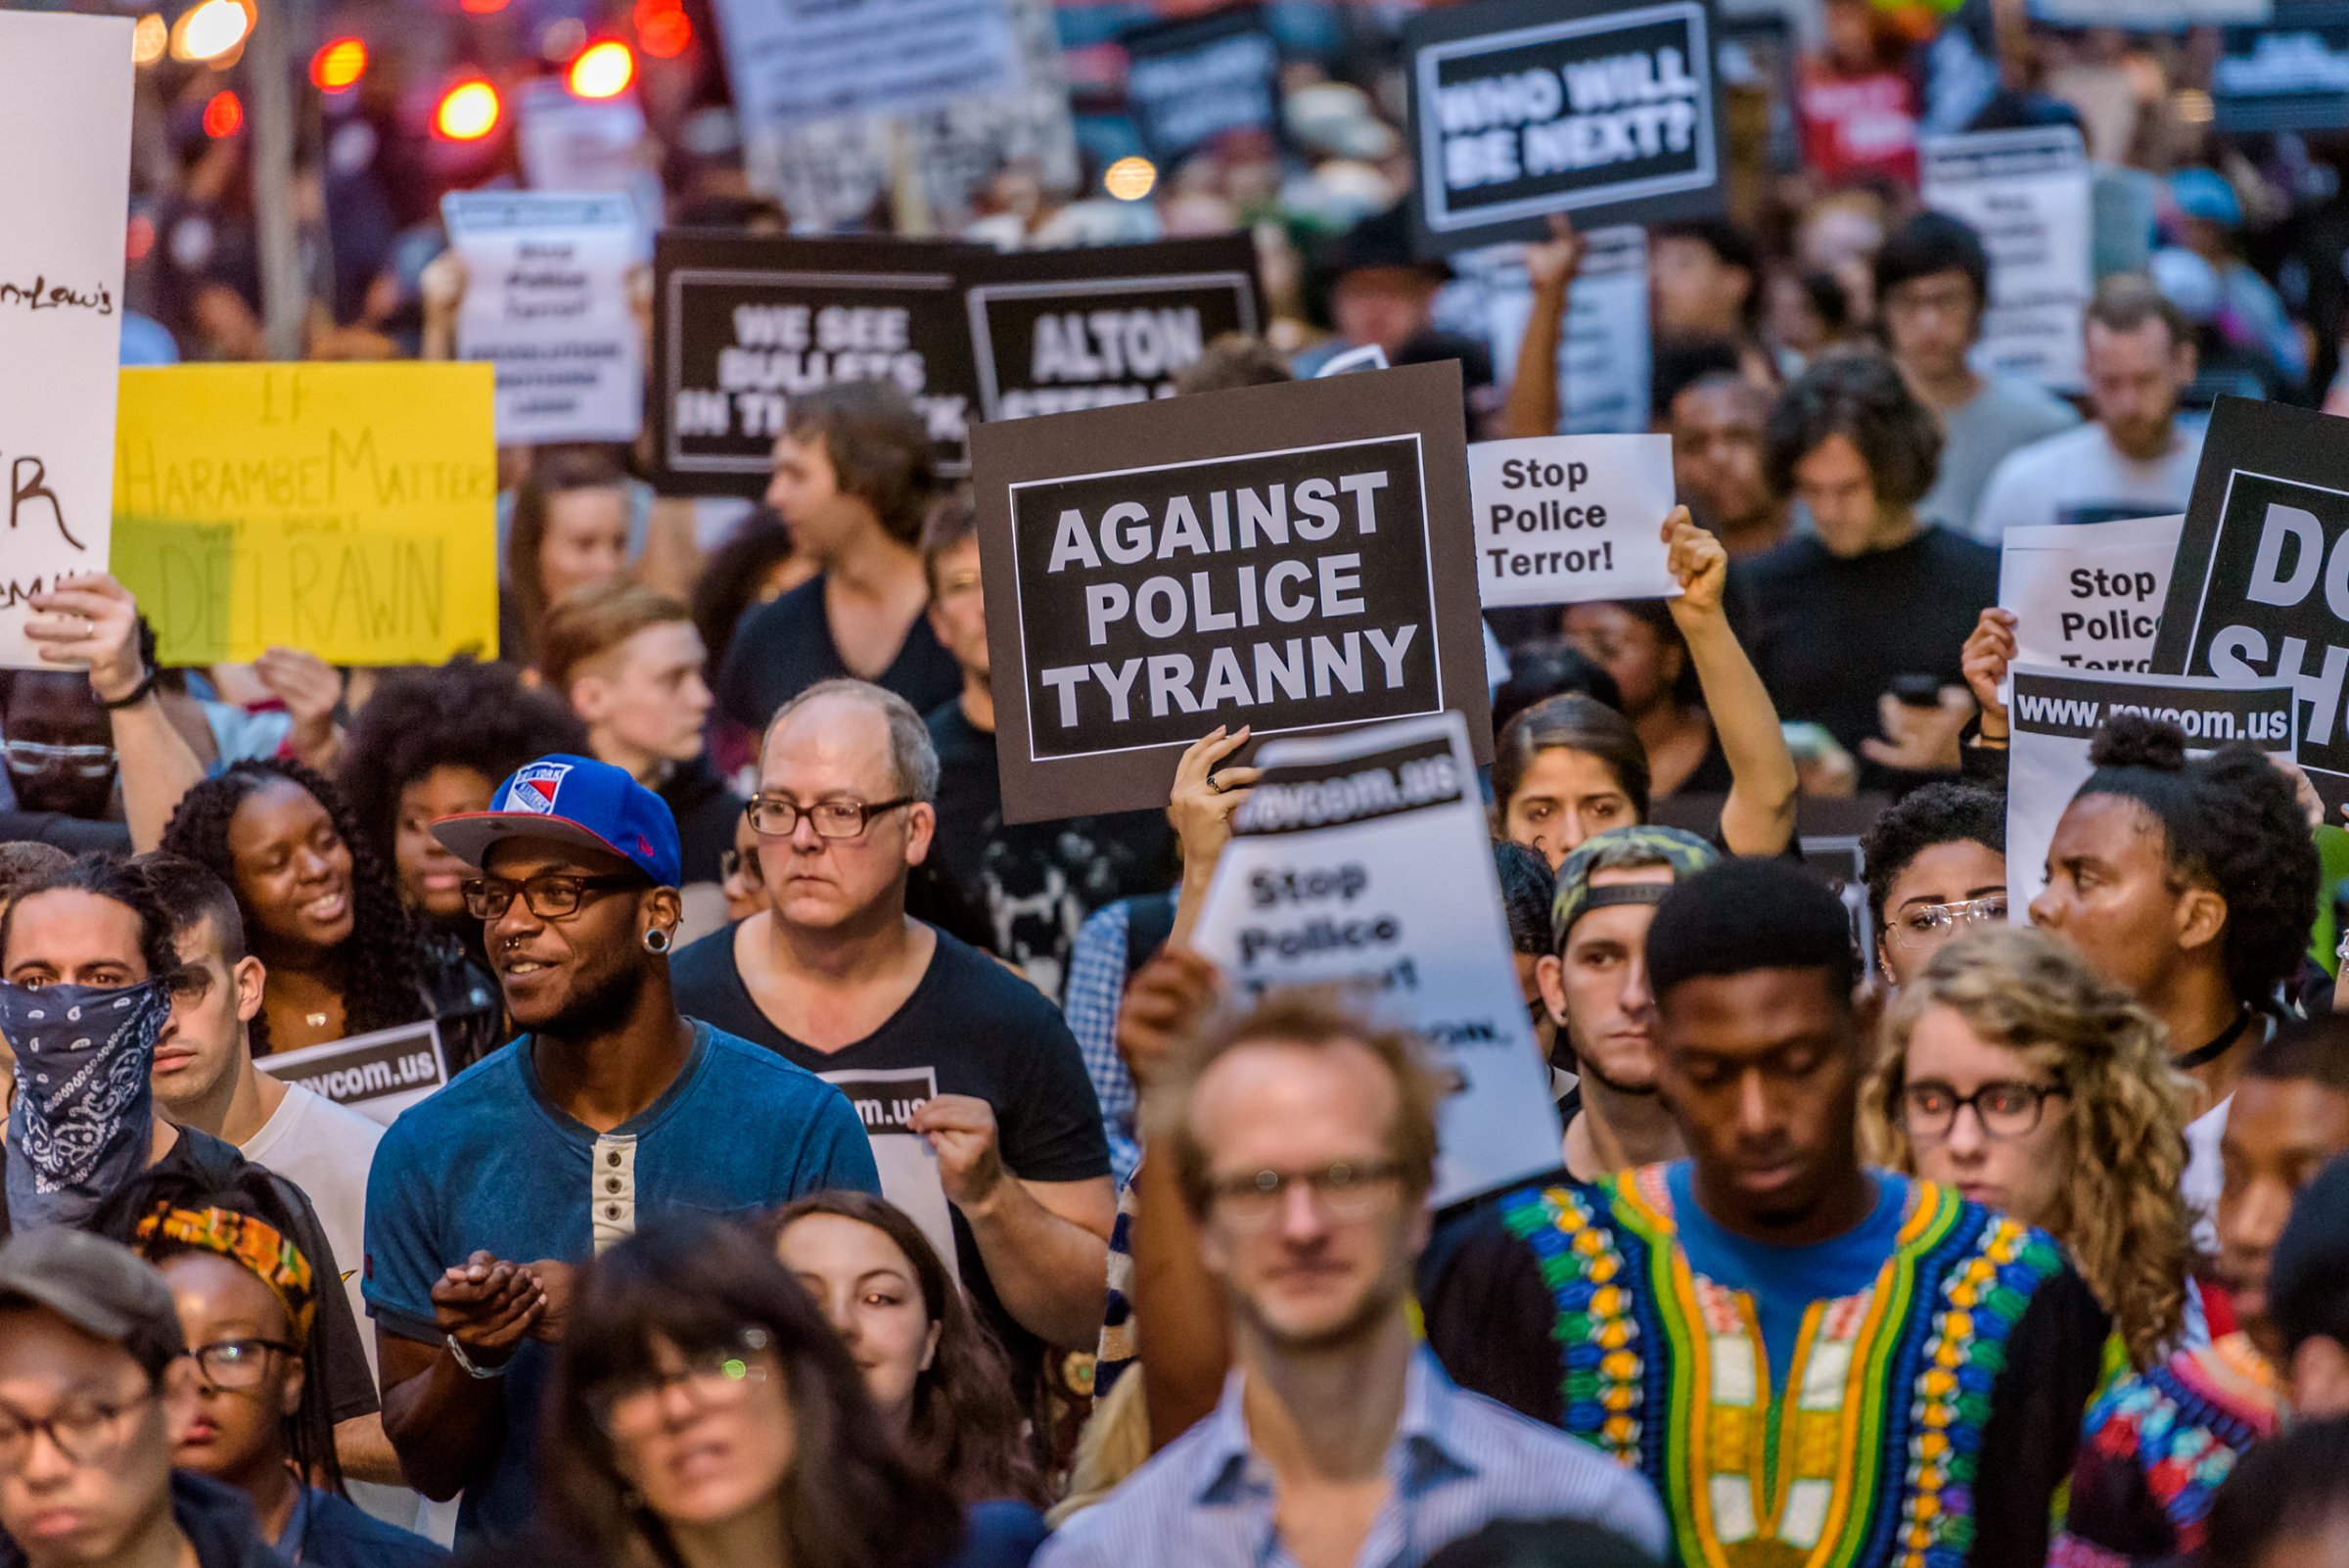 For the third day in a row the Black Lives Matter movement took the streets of New York to protest police brutality in the aftermath of the release of the security camera video capturing the death of Delrawn Small contradicting the NYPD story spread on the media, July 9, 2016.